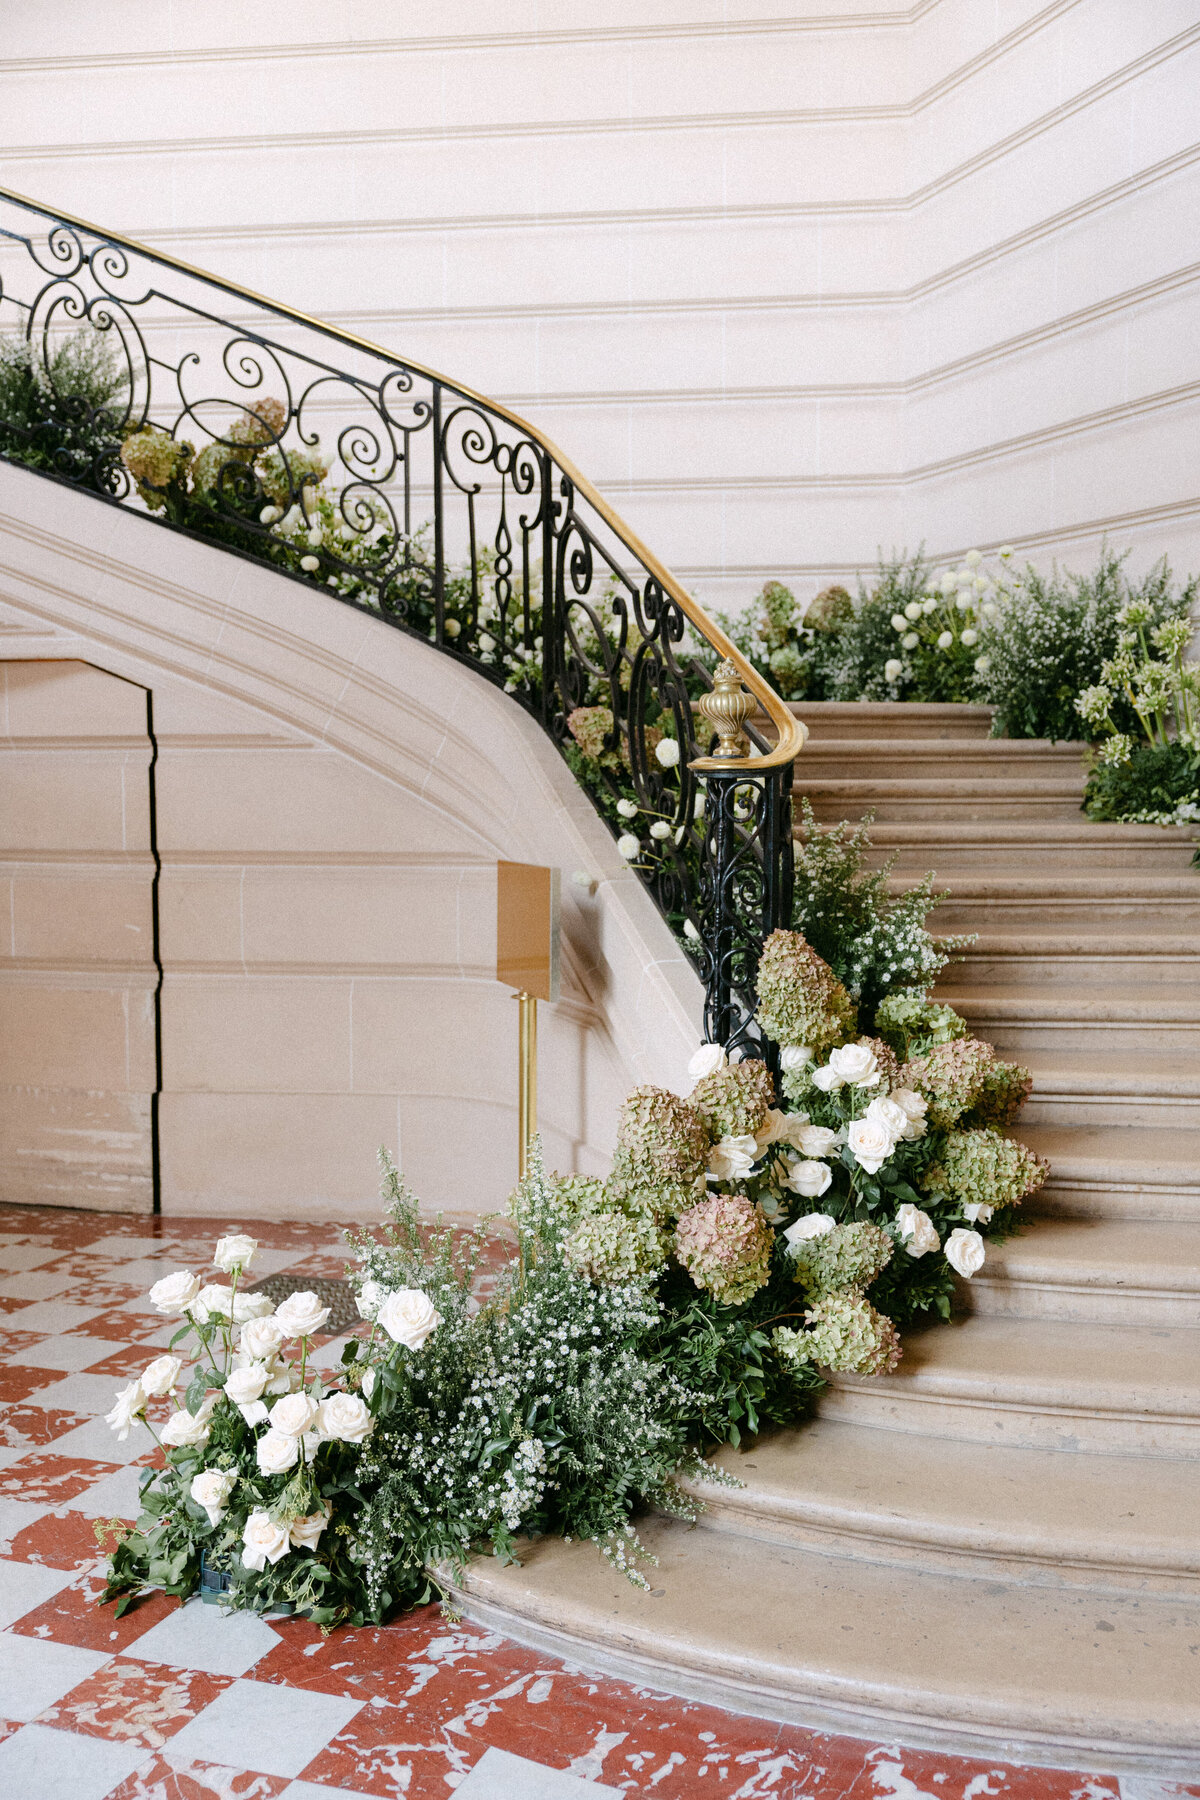 Jennifer Fox Weddings English speaking wedding planning & design agency in France crafting refined and bespoke weddings and celebrations Provence, Paris and destination wd781